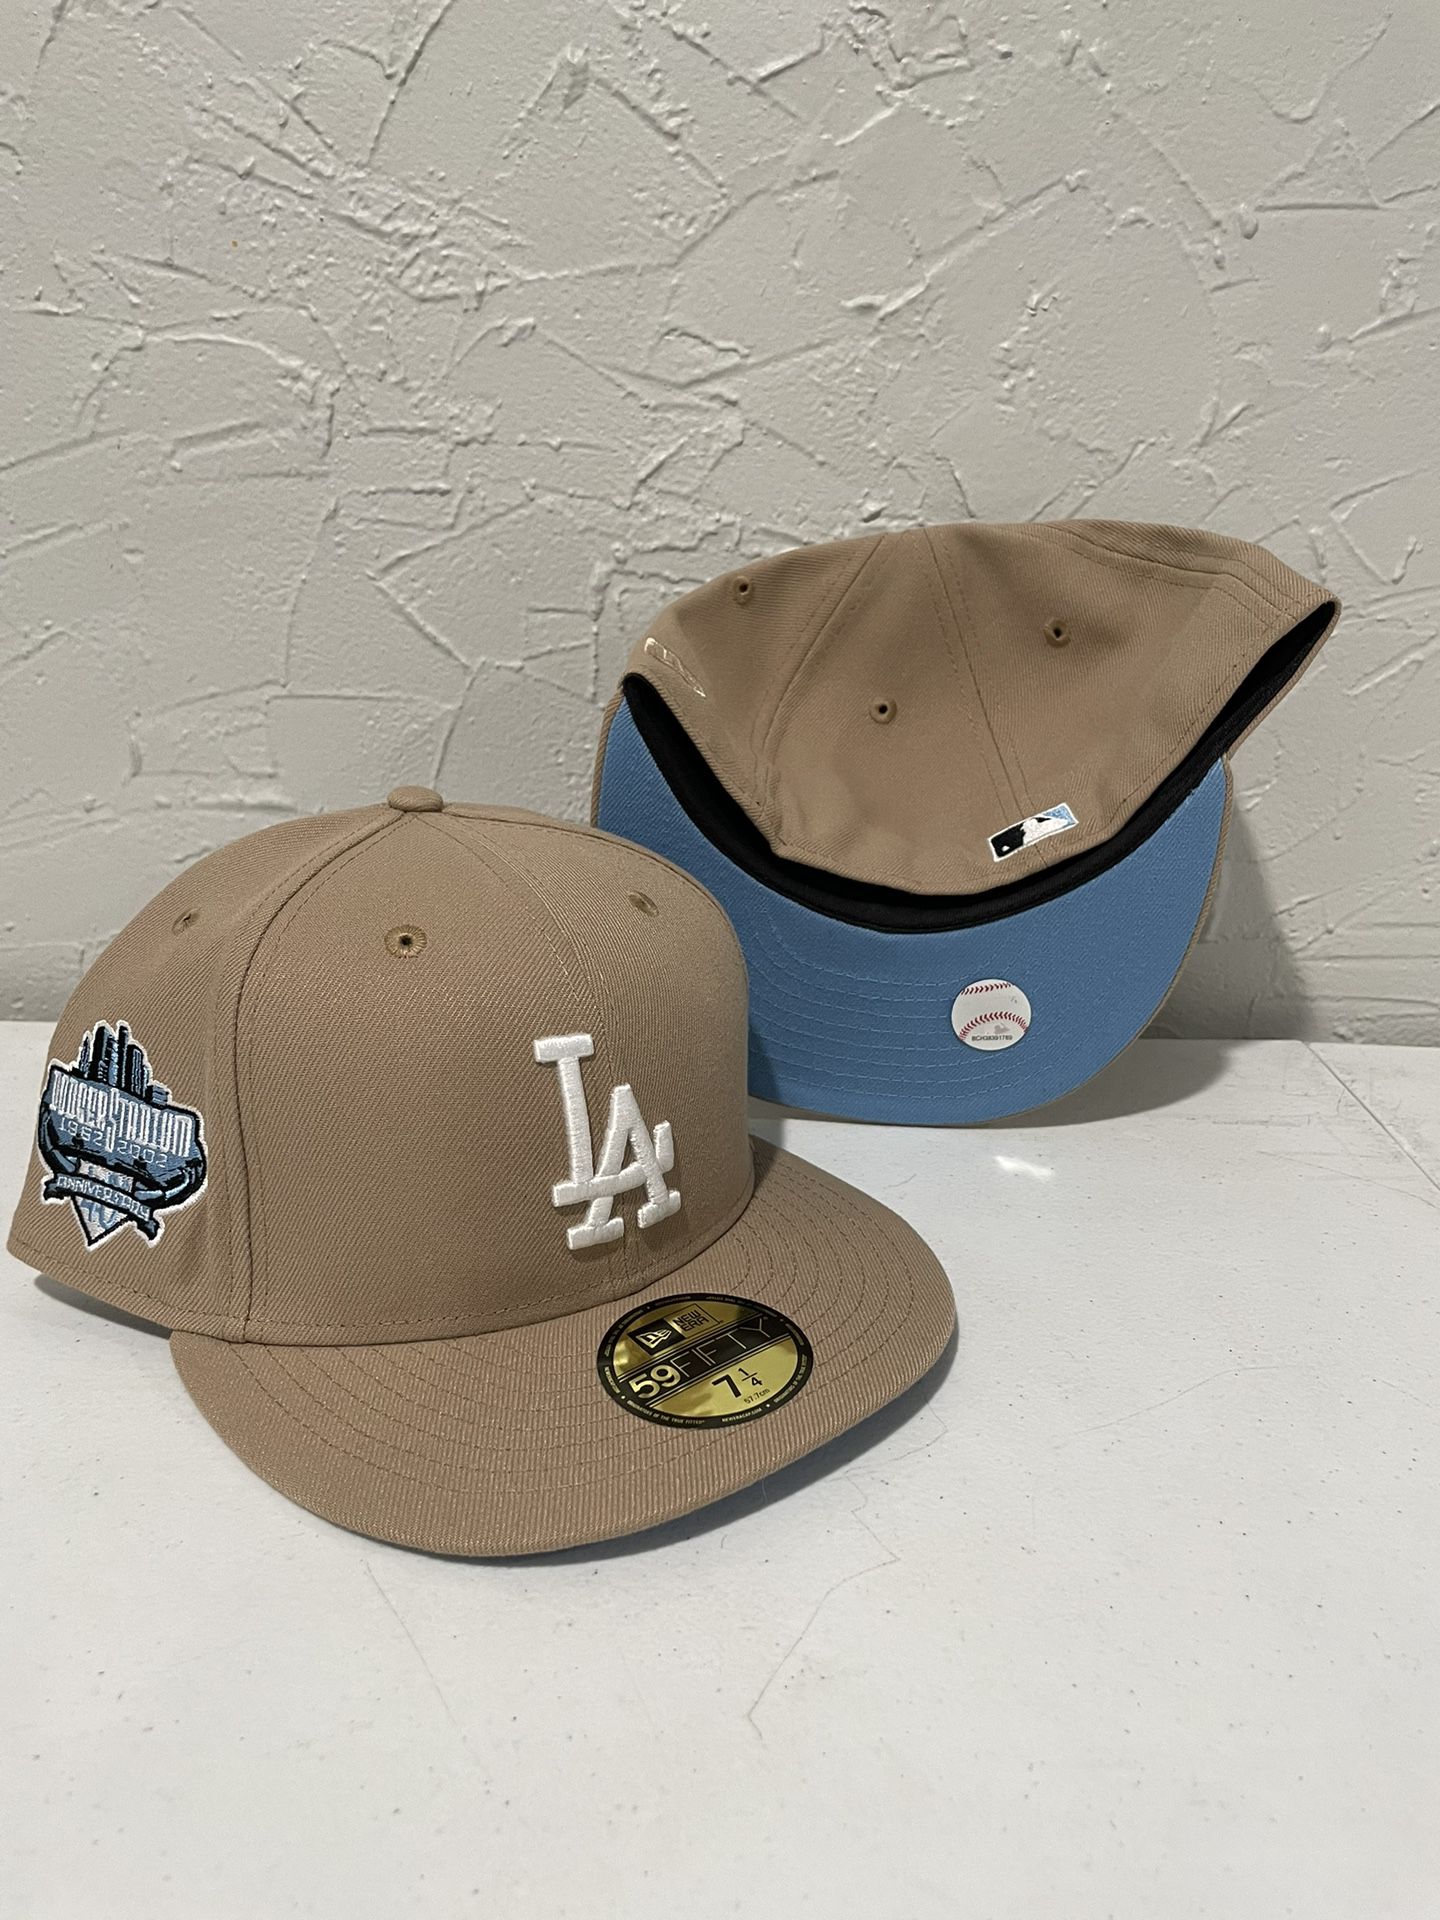 MLB New Era Los Angeles Dodgers Camel Brown 40th Anniversary Patch